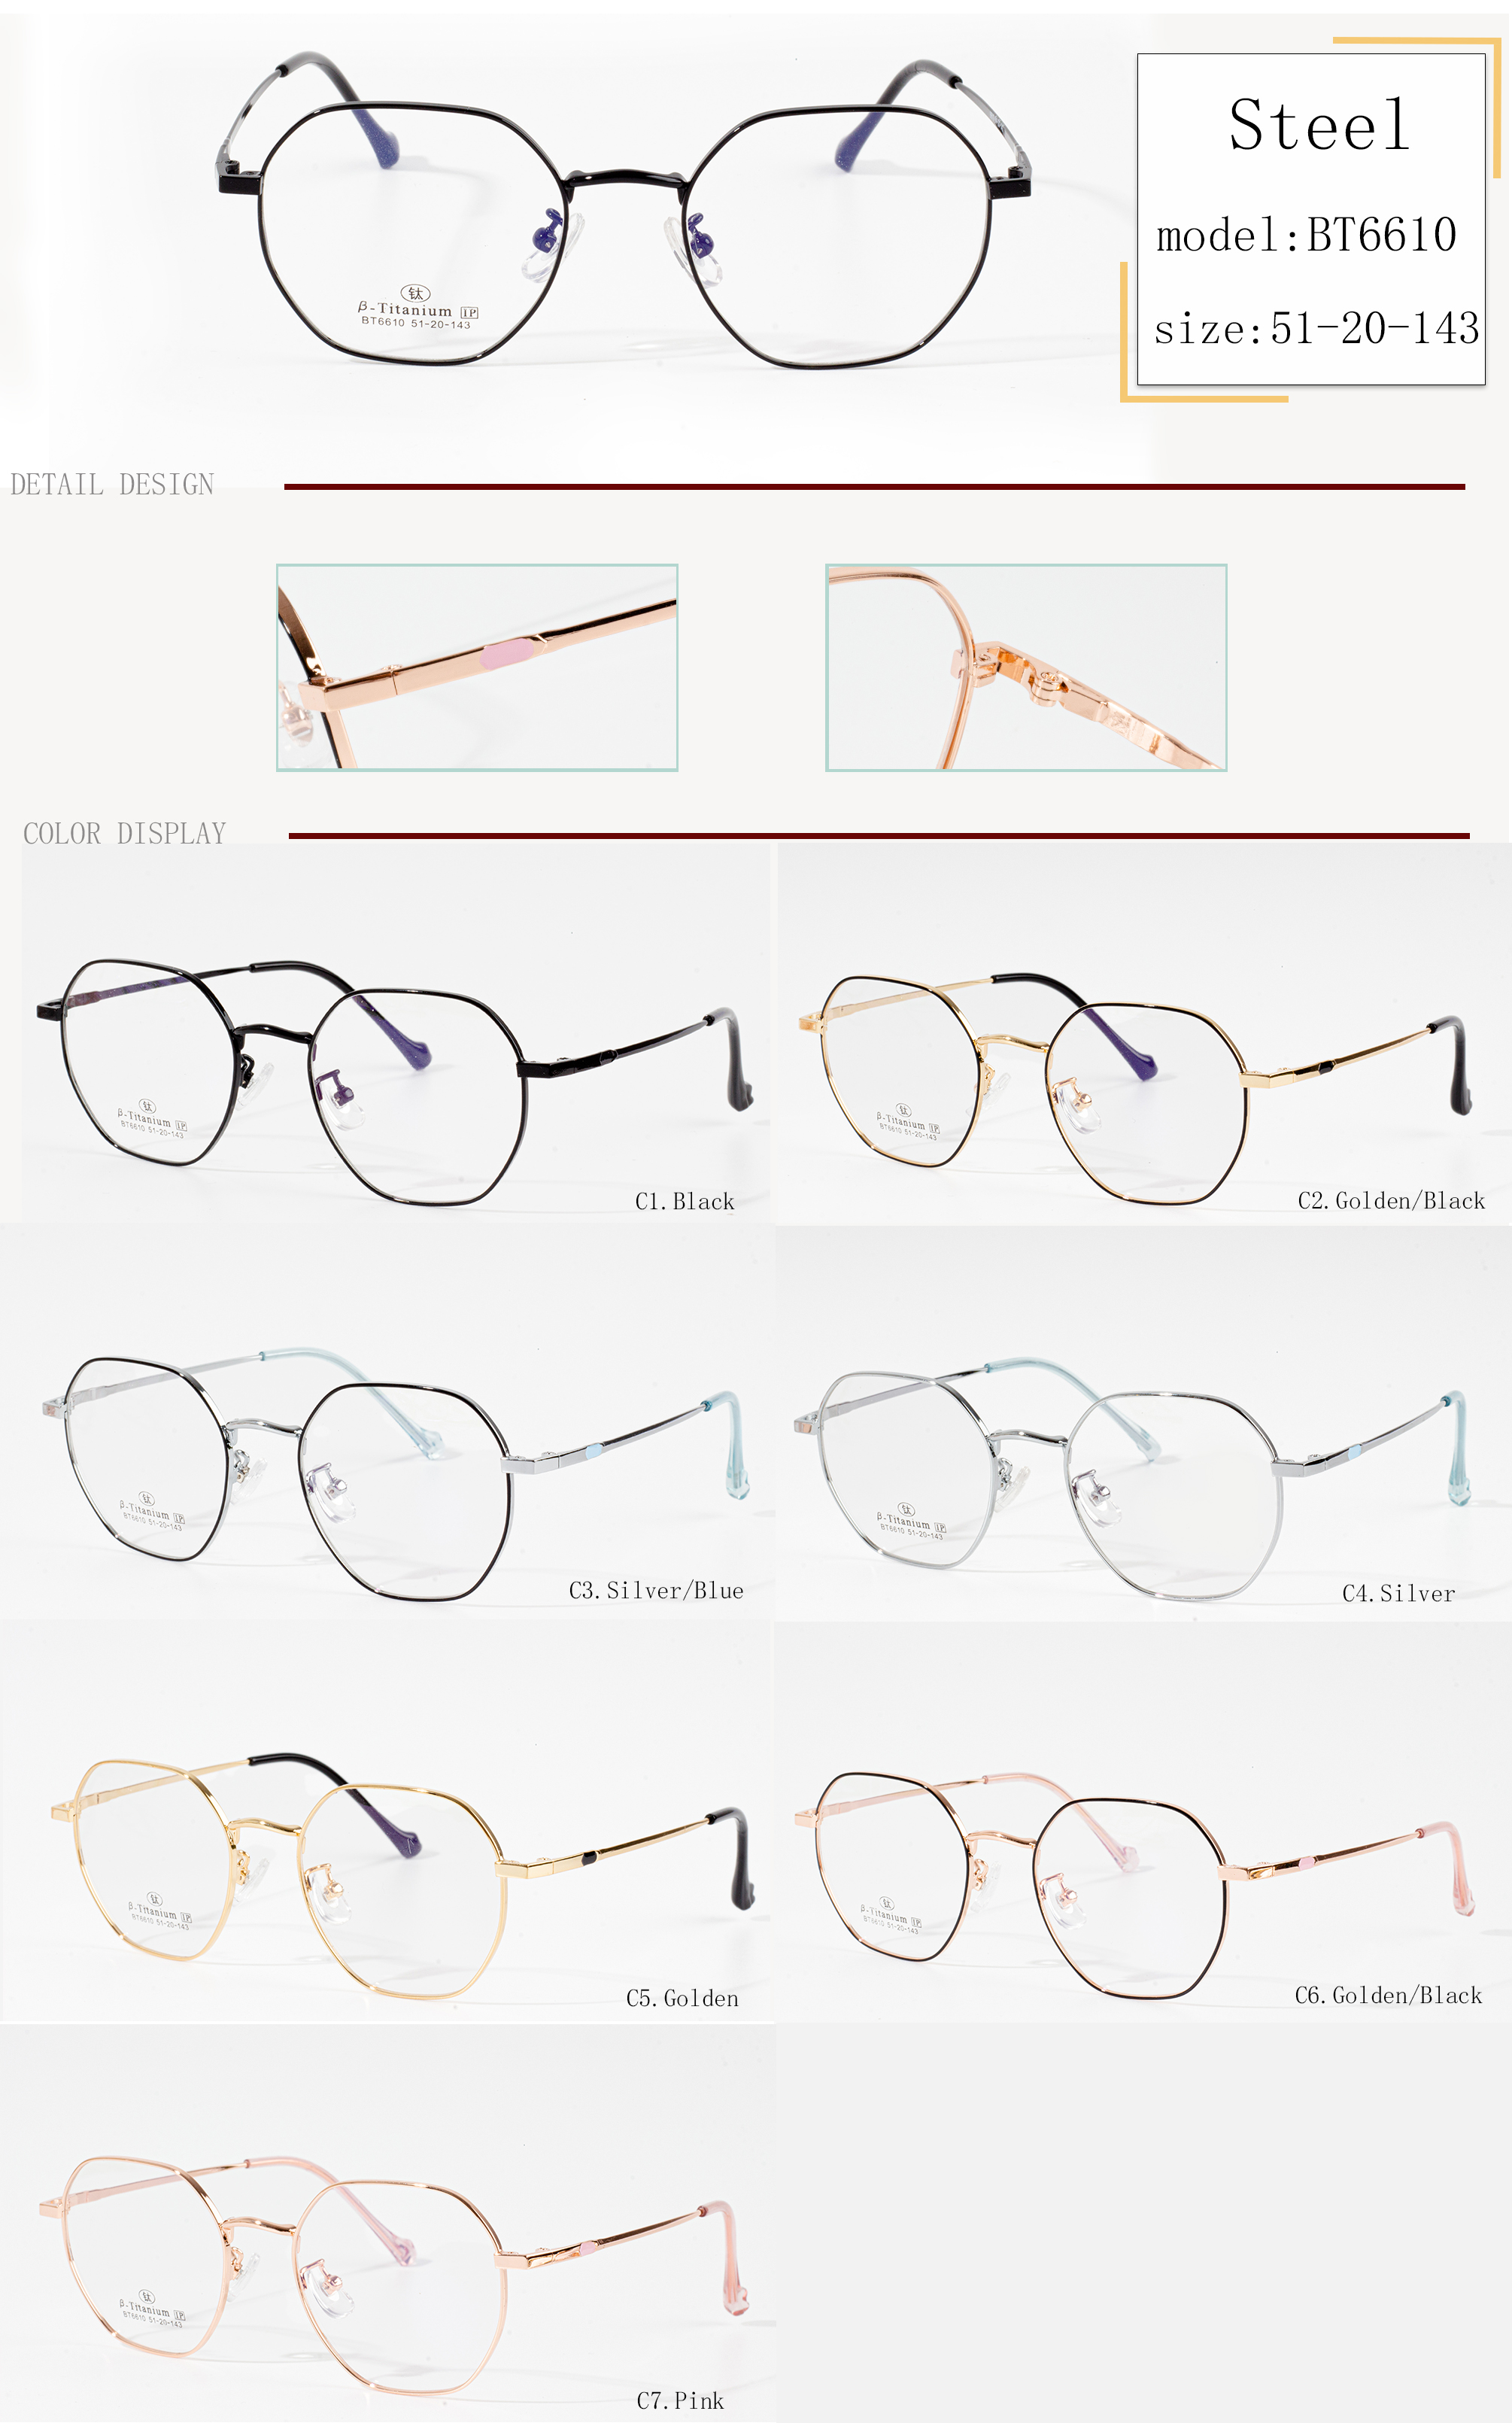 eyeglasses with changeable frames